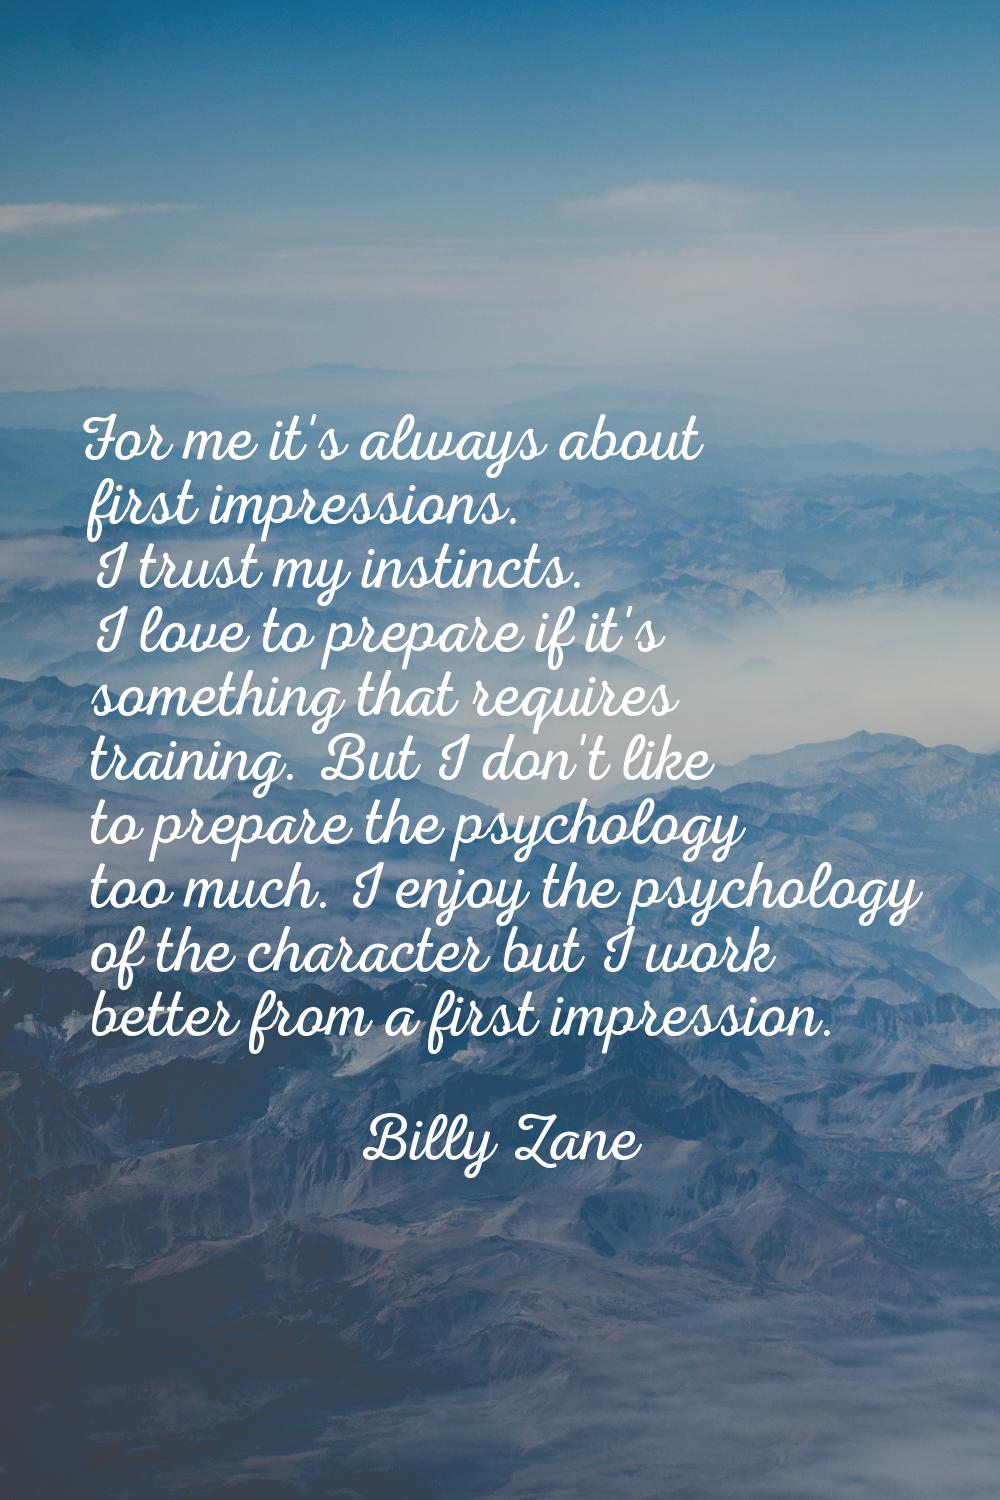 For me it's always about first impressions. I trust my instincts. I love to prepare if it's somethi